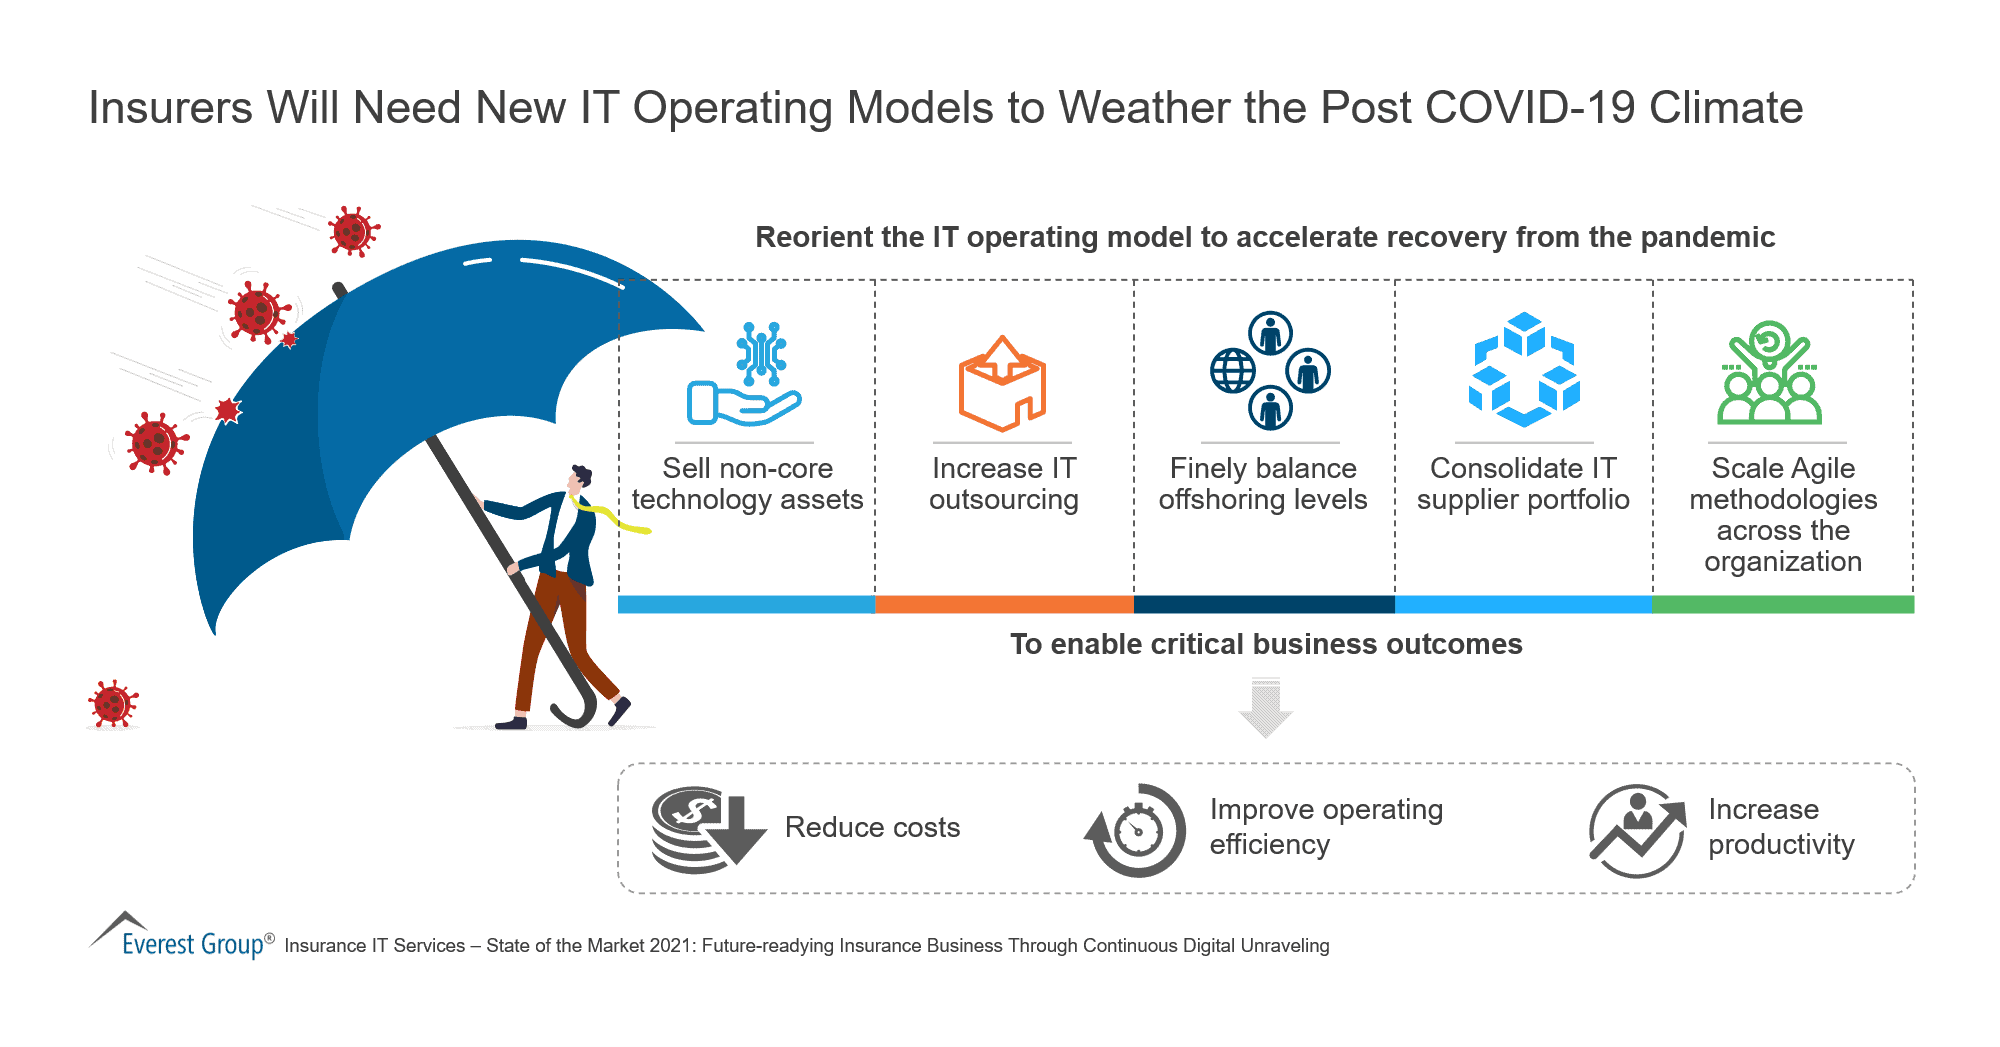 Insurers Will Need New IT Operating Models to Weather the Post COVID-19 Climate